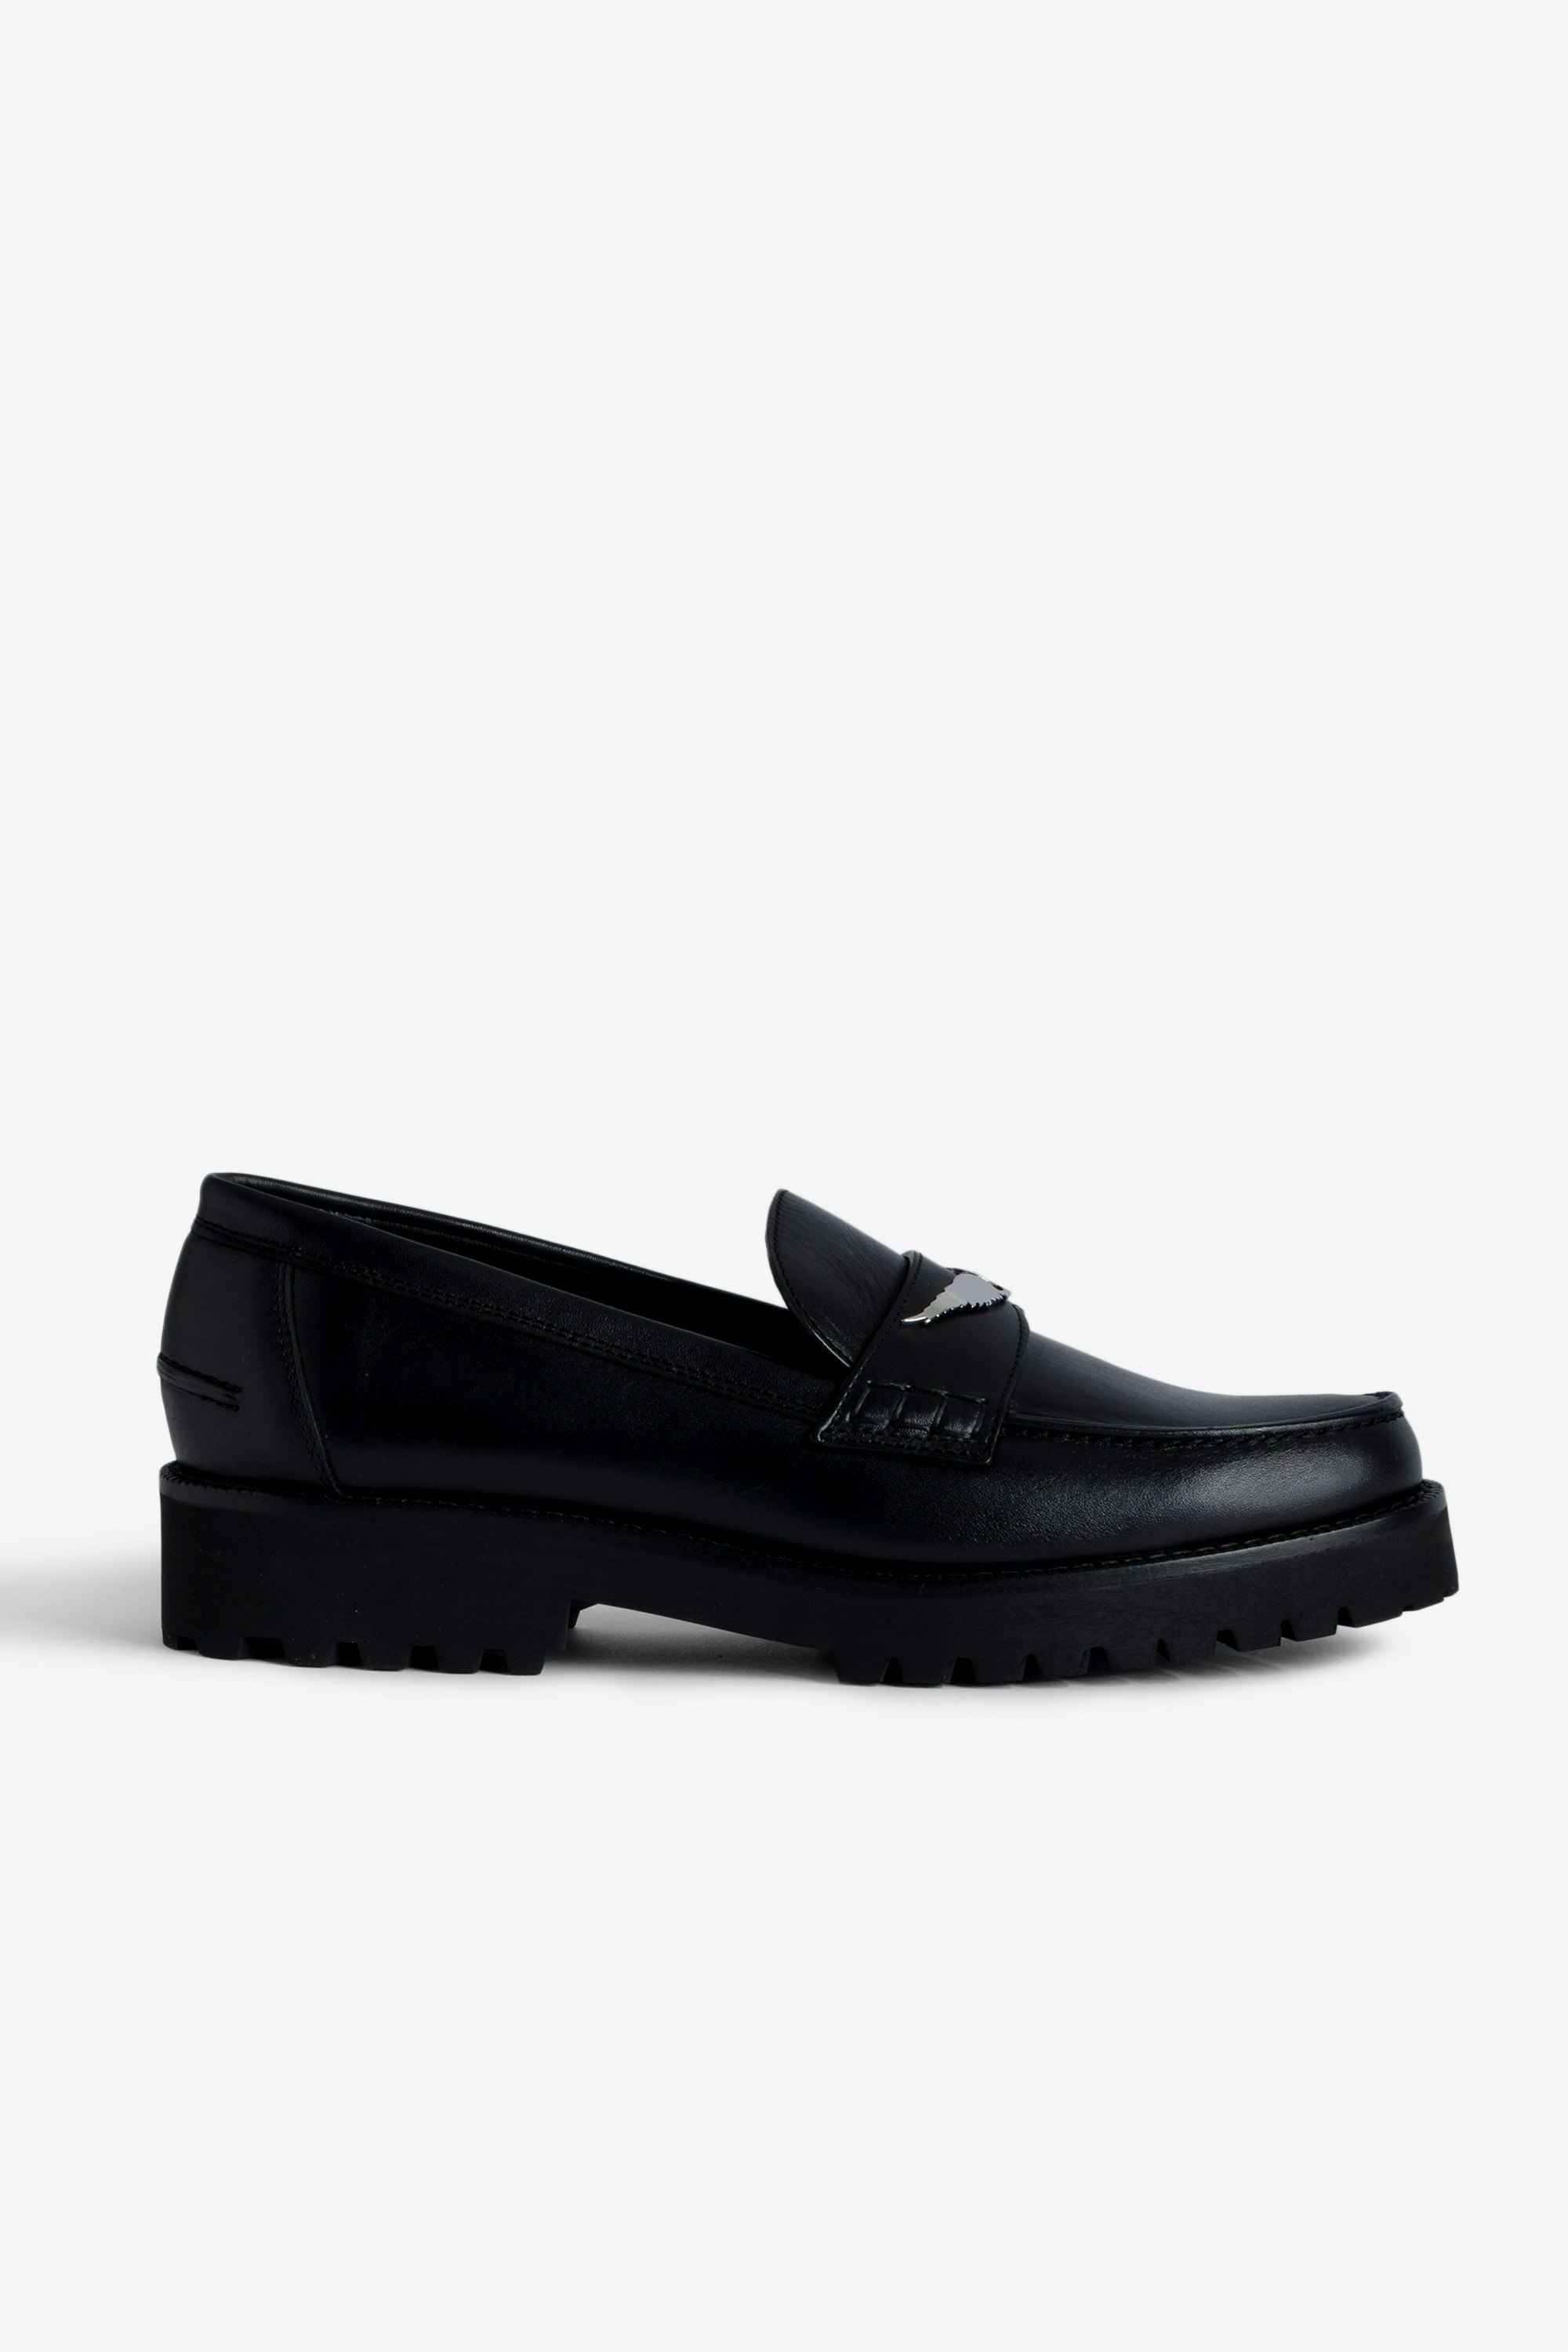 Joecassin Loafers Women’s black semi-patent smooth leather loafers with wings charm.